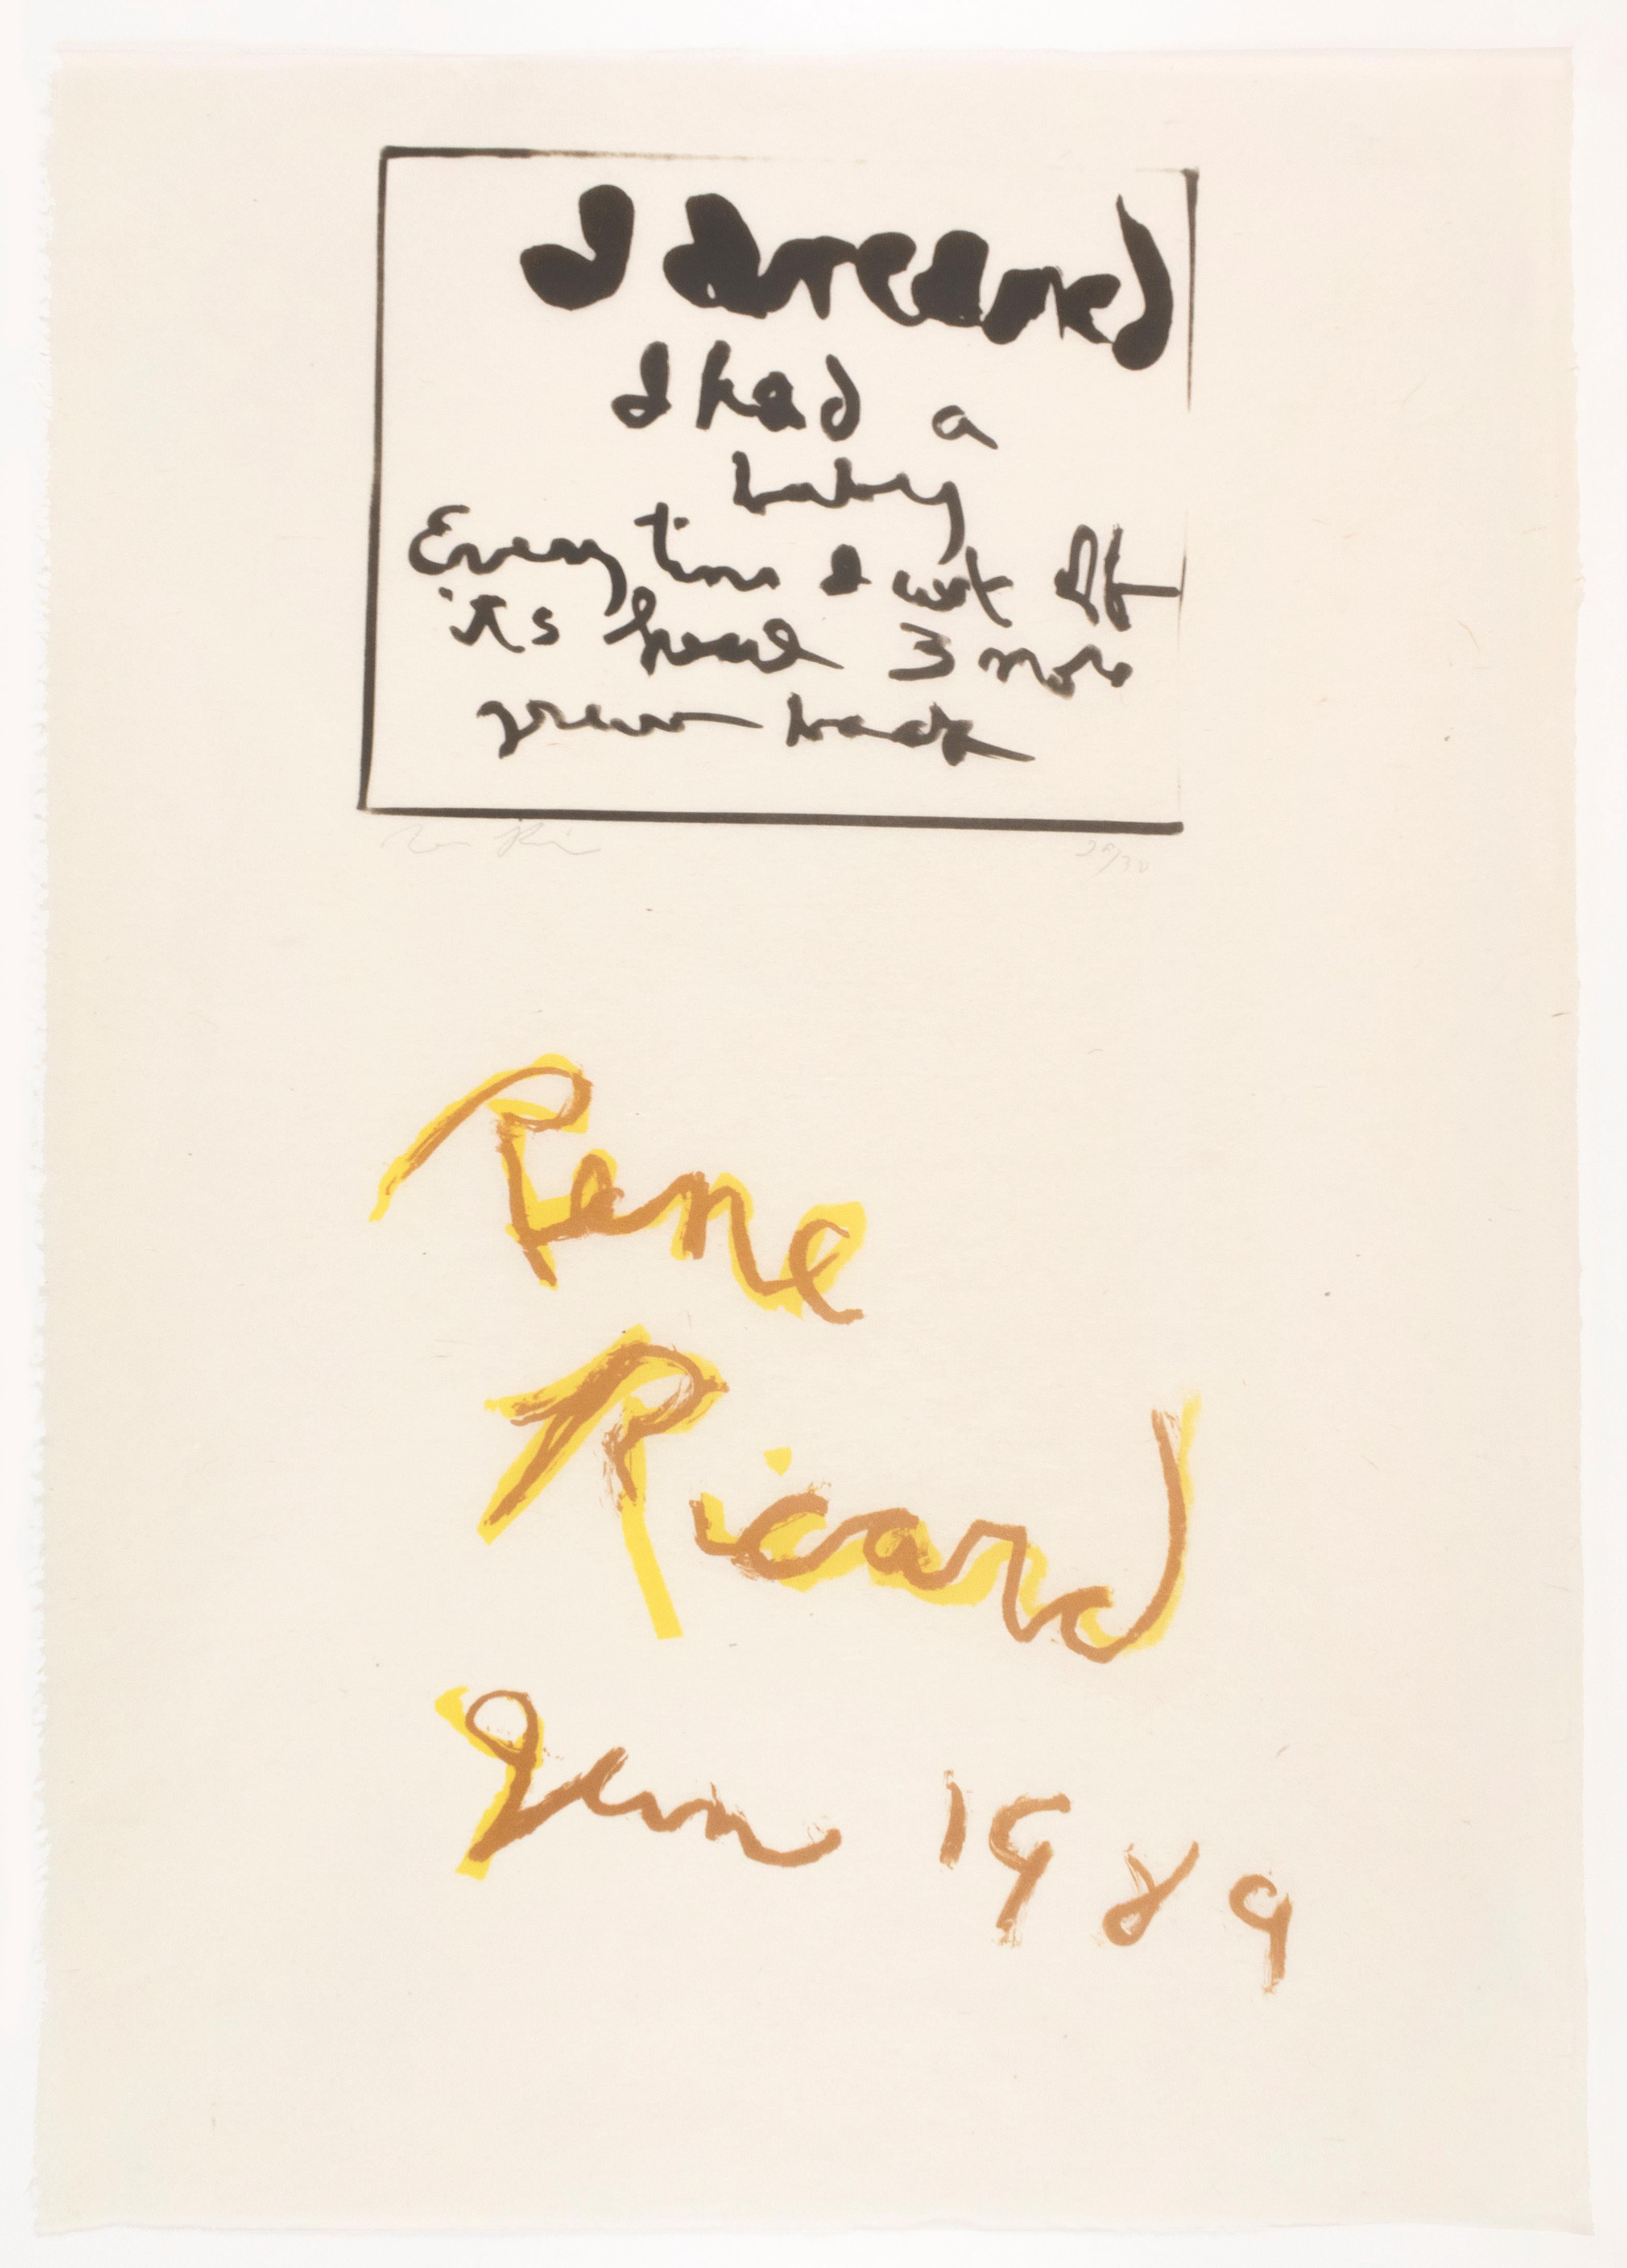 Abstract yellow and black Rene Ricard print with hand painted poetry on handmade paper. Printed in black ink at the top of the sheet and framed with a thin line, the artist's loose handwriting reads: "I dreamed / I had a baby / Every time I cut off